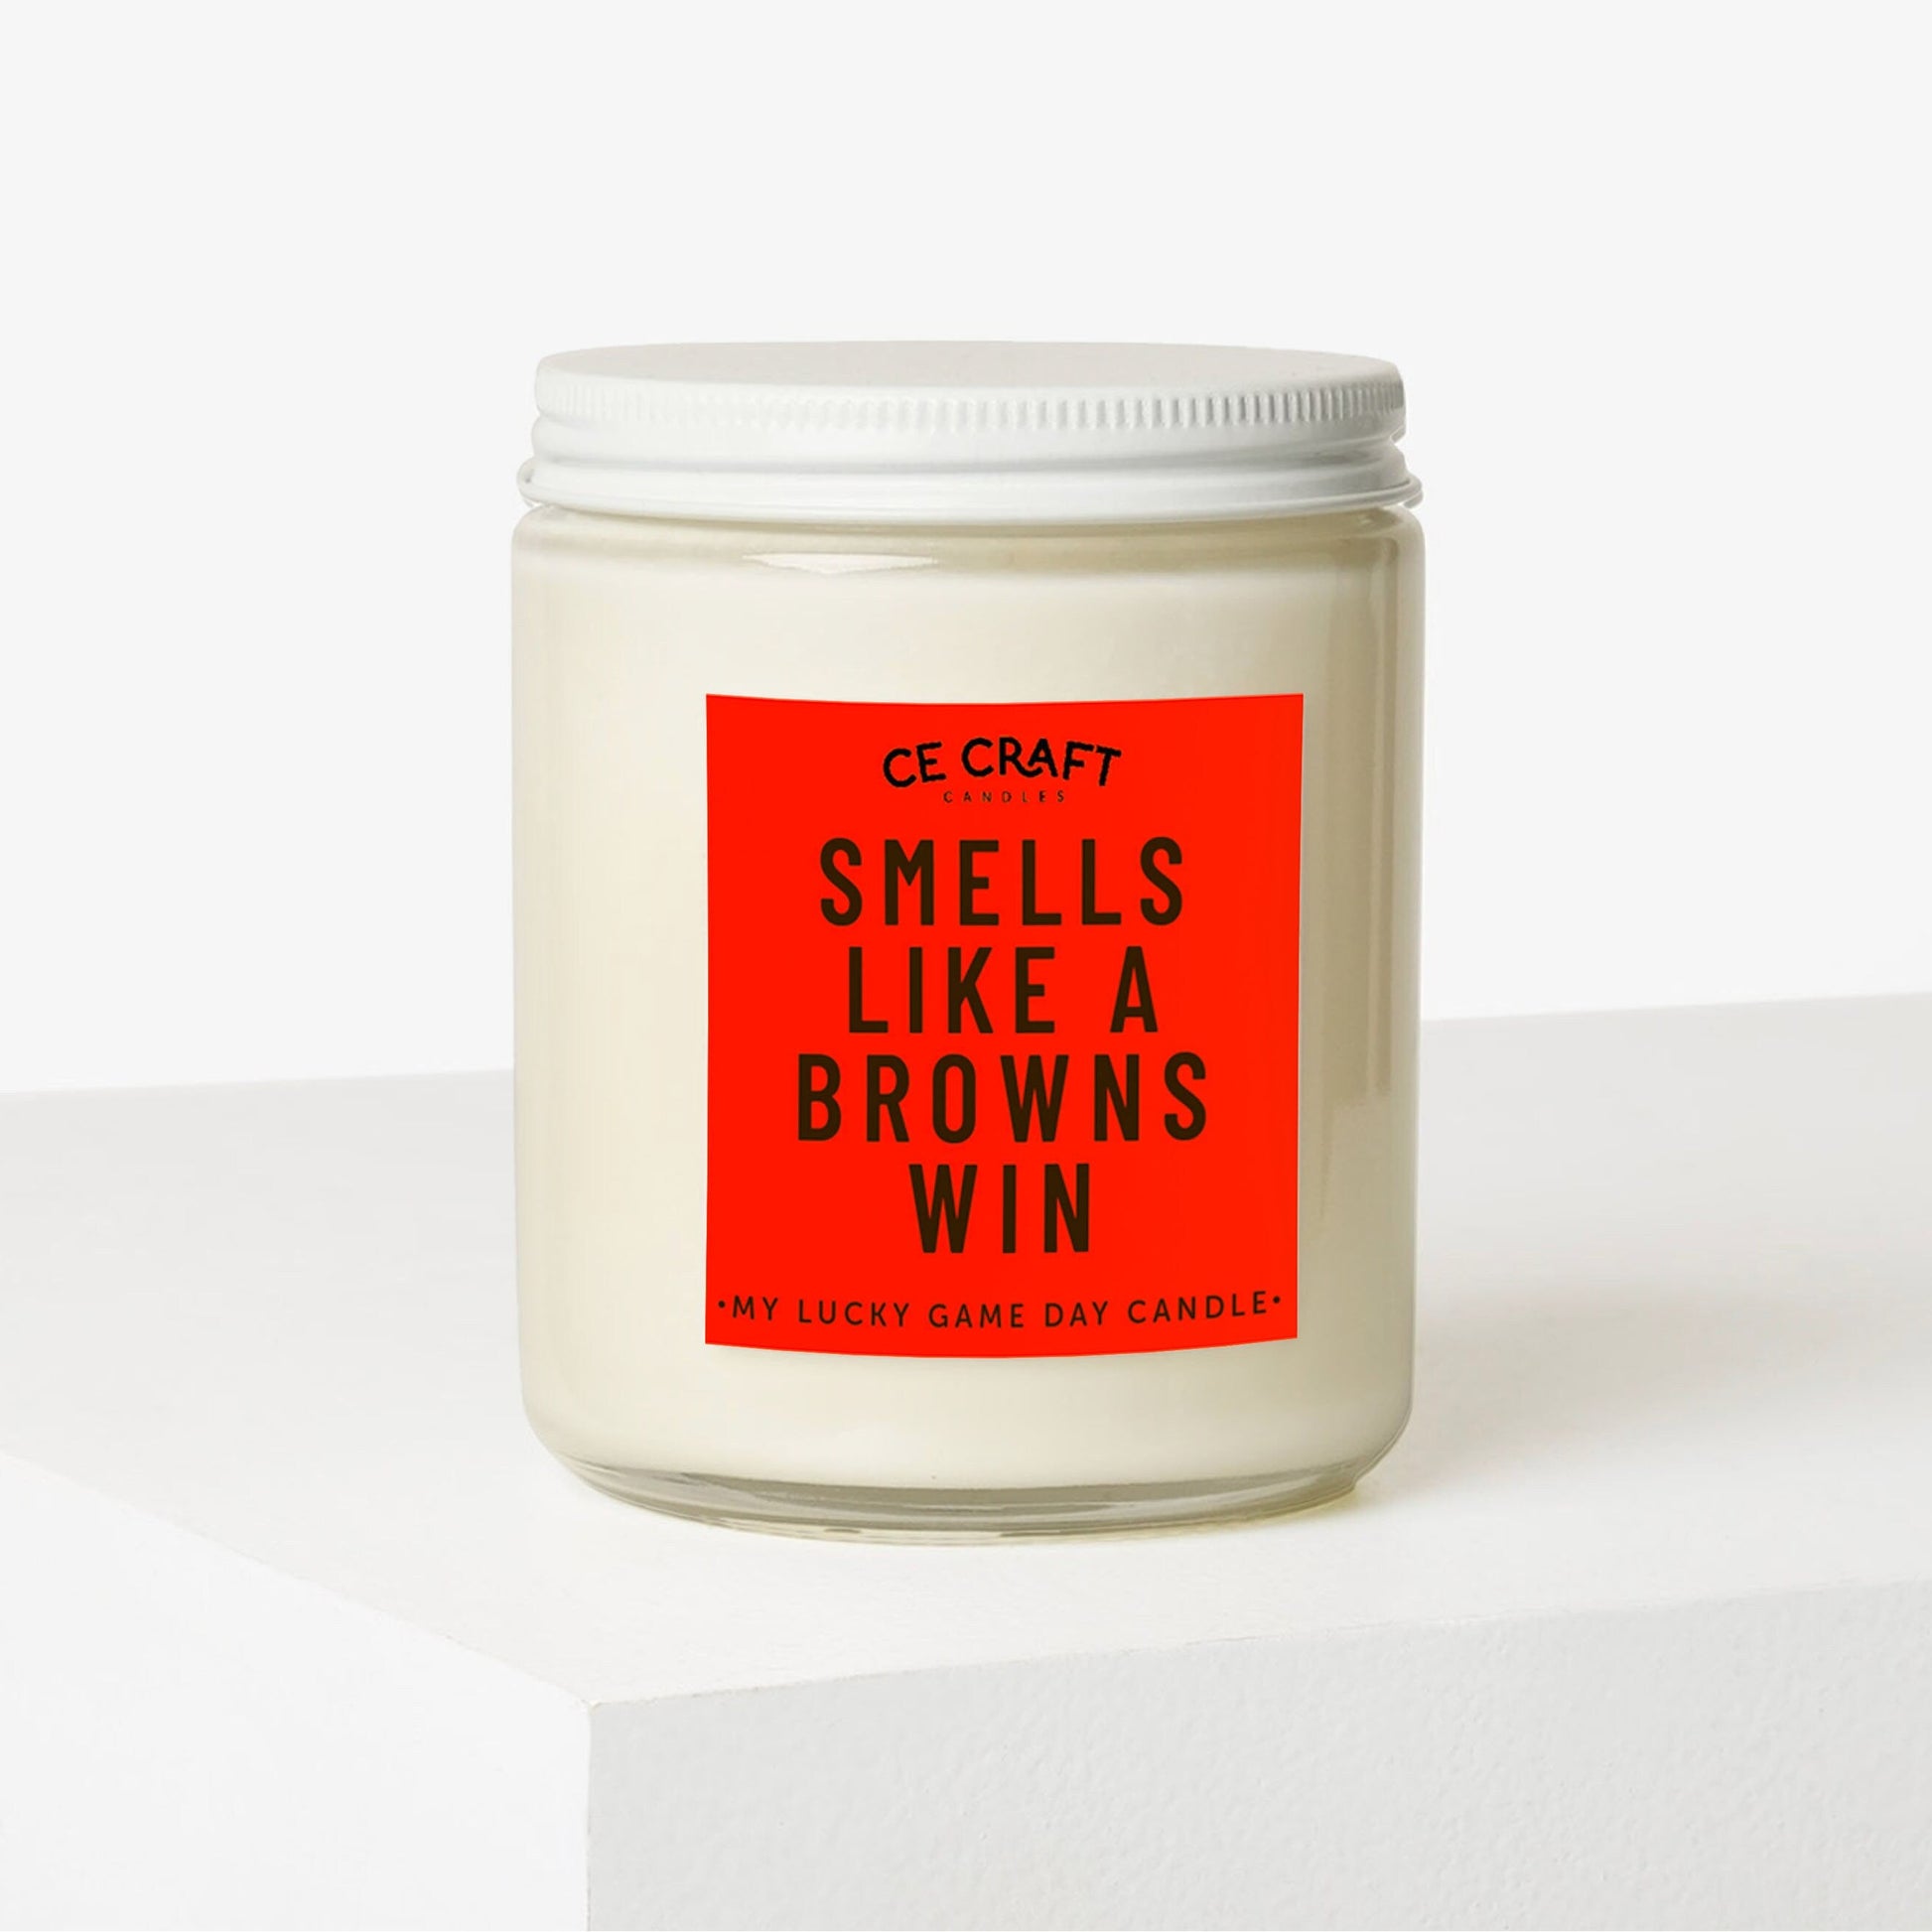 Smells Like a Browns Win Scented Candle C & E Craft Co 